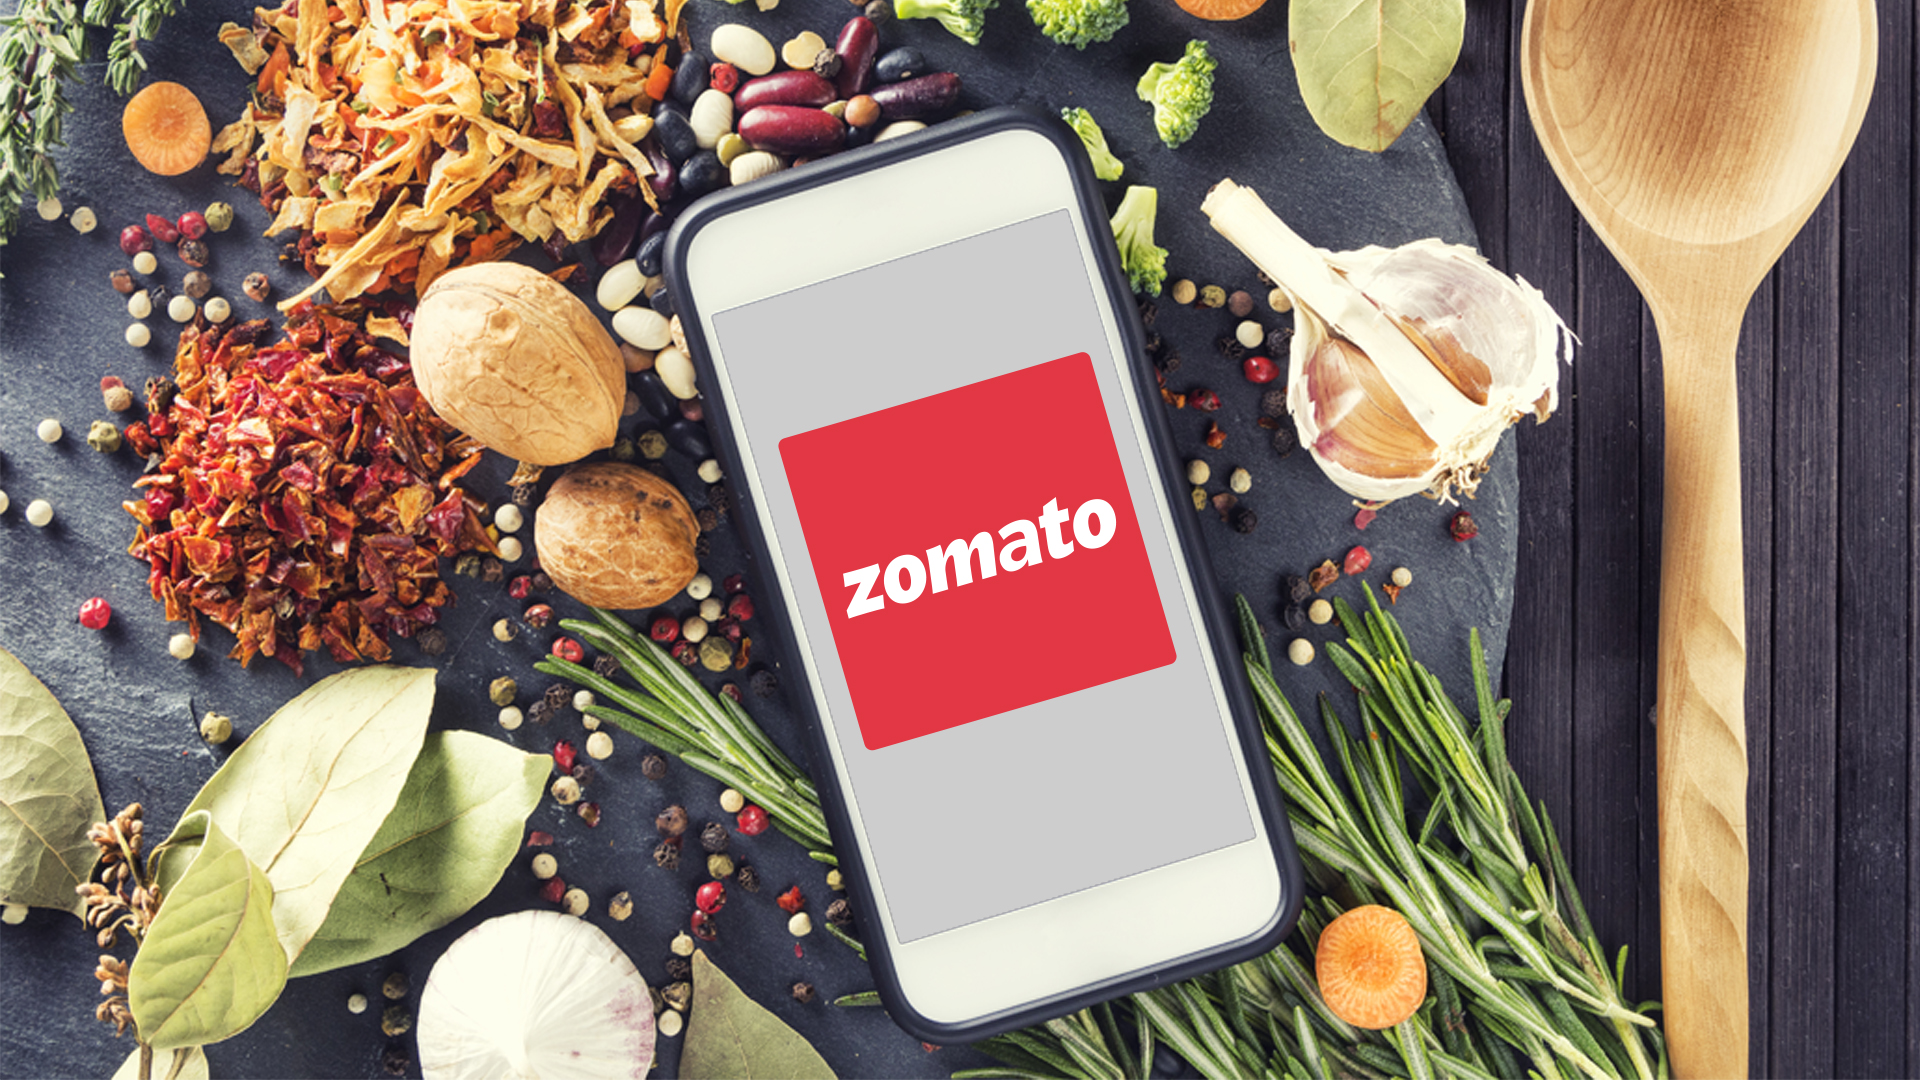 Zomato emerges most trusted brand during pandemic: Survey